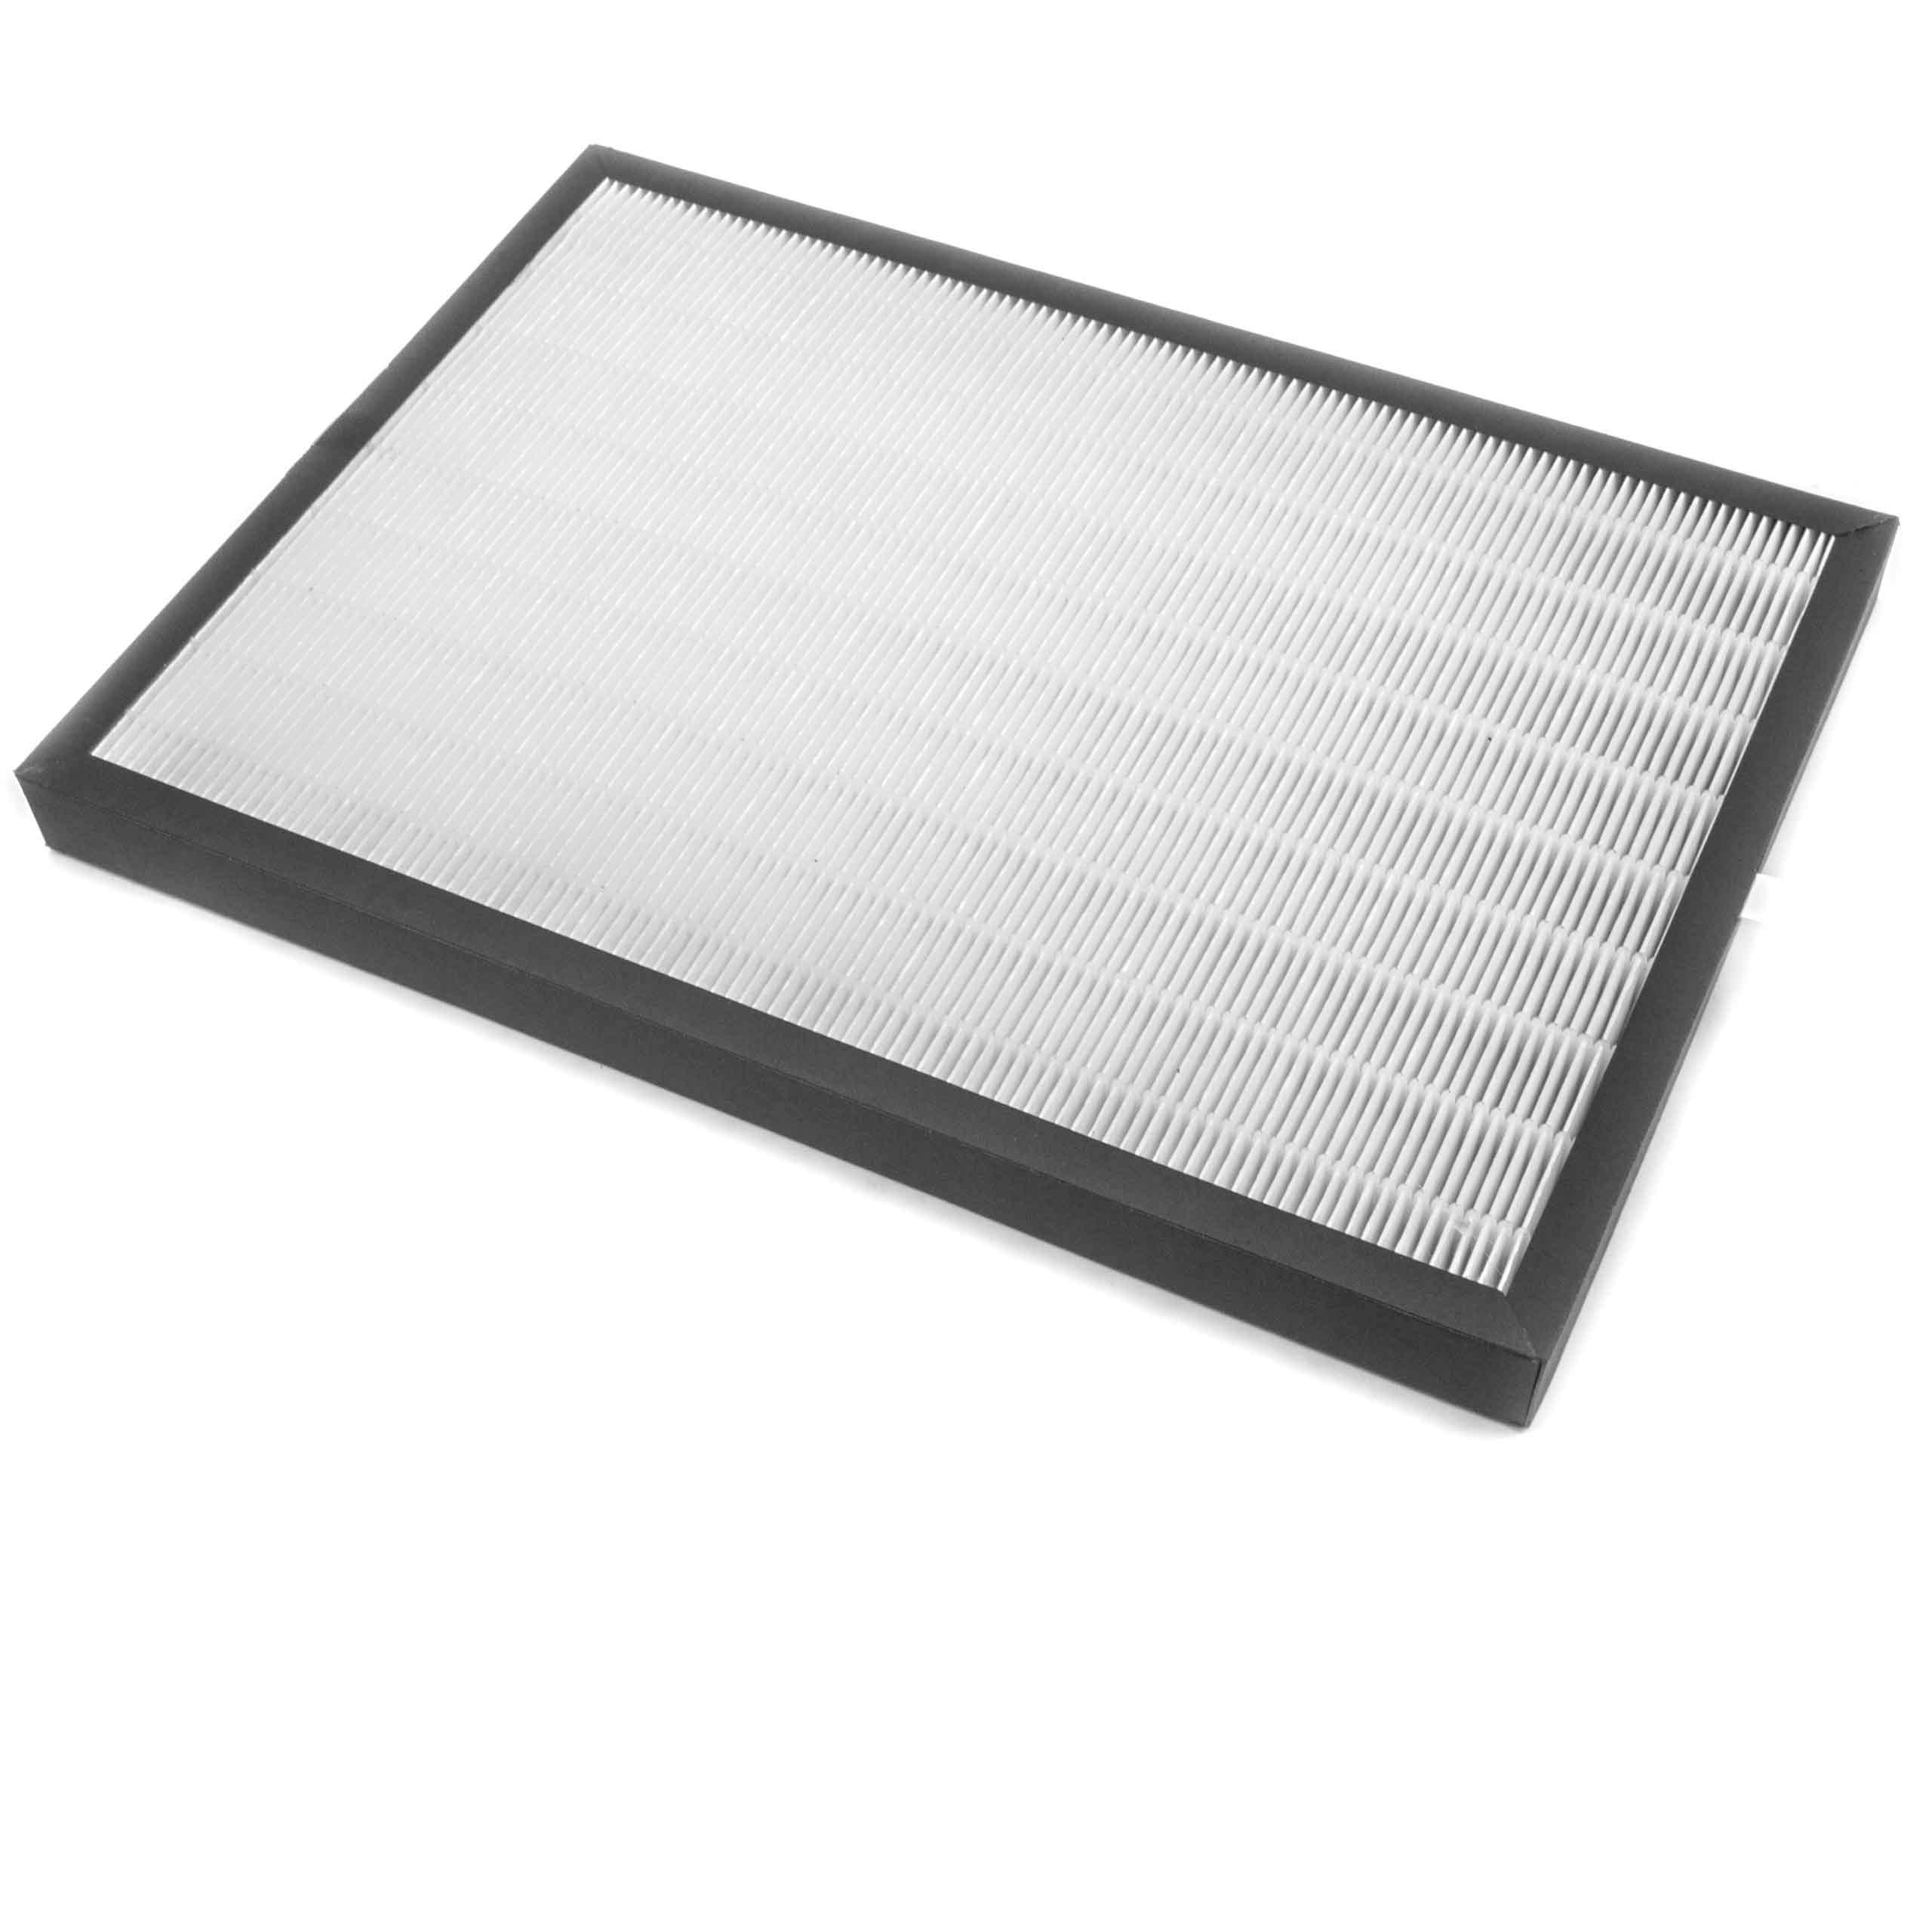 Filter as Replacement for DeLonghi ACF-2 - HEPA + Activated Carbon, 36.5 x 26 x 2.5 cm